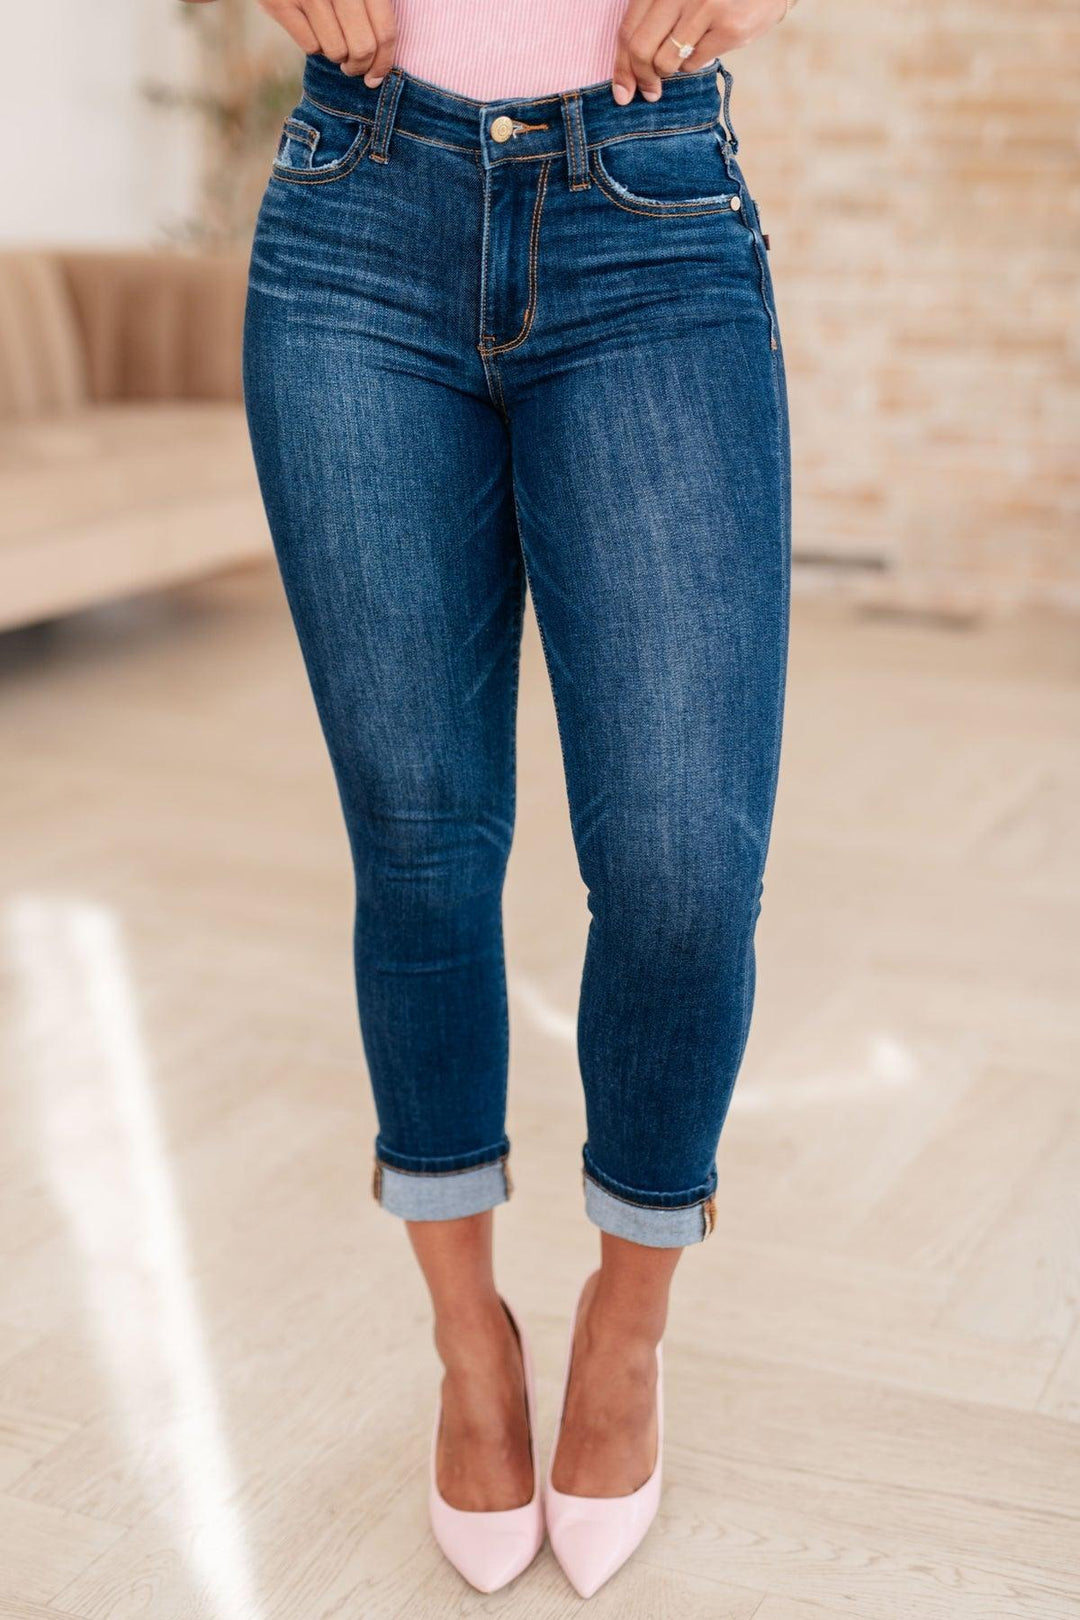 Judy Blue Cuffed Skinny Jeans - Inspired Eye Boutique